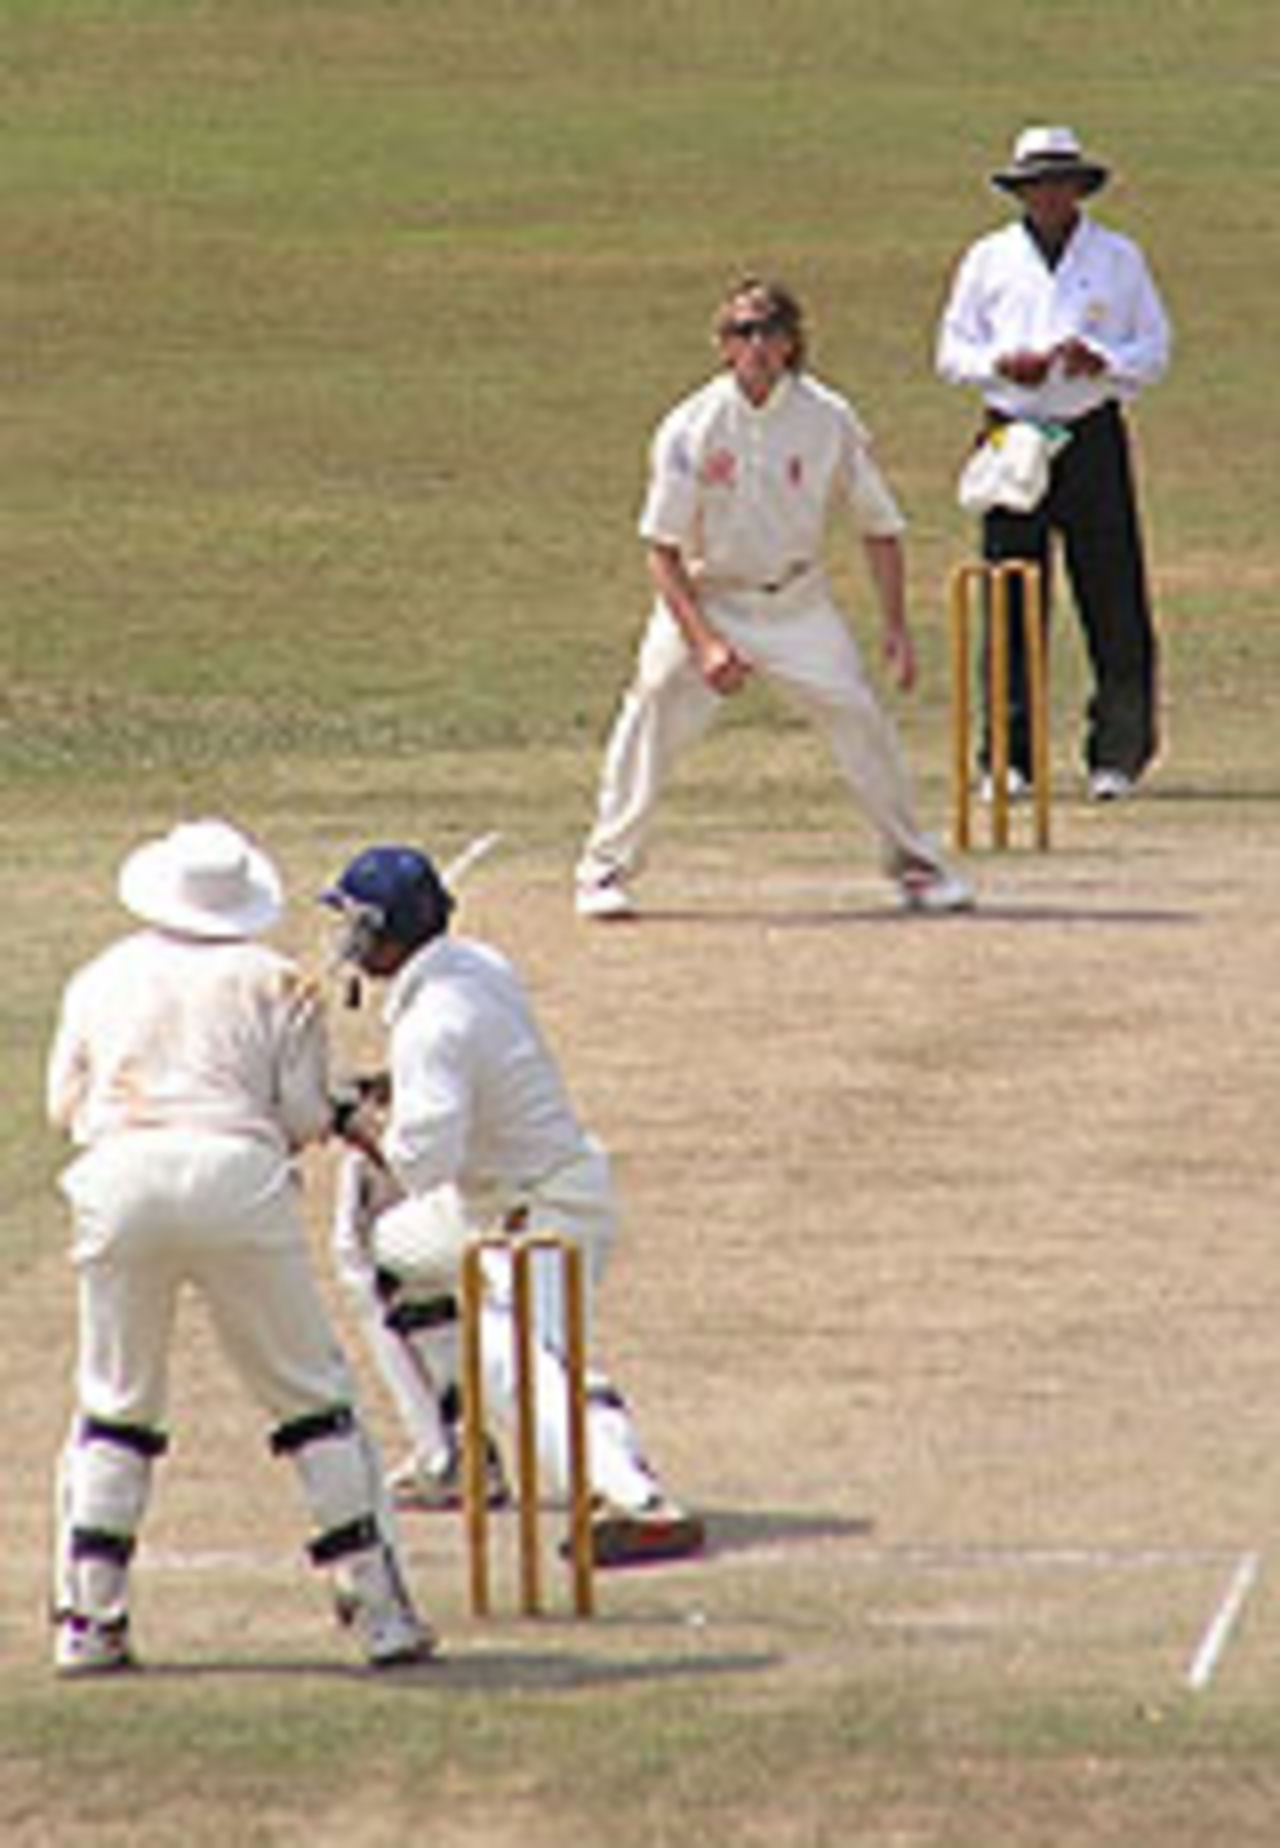 Graeme Swann took five wickets to bowl England A to victory over Sri Lanka A in Colombo, March 10, 2005